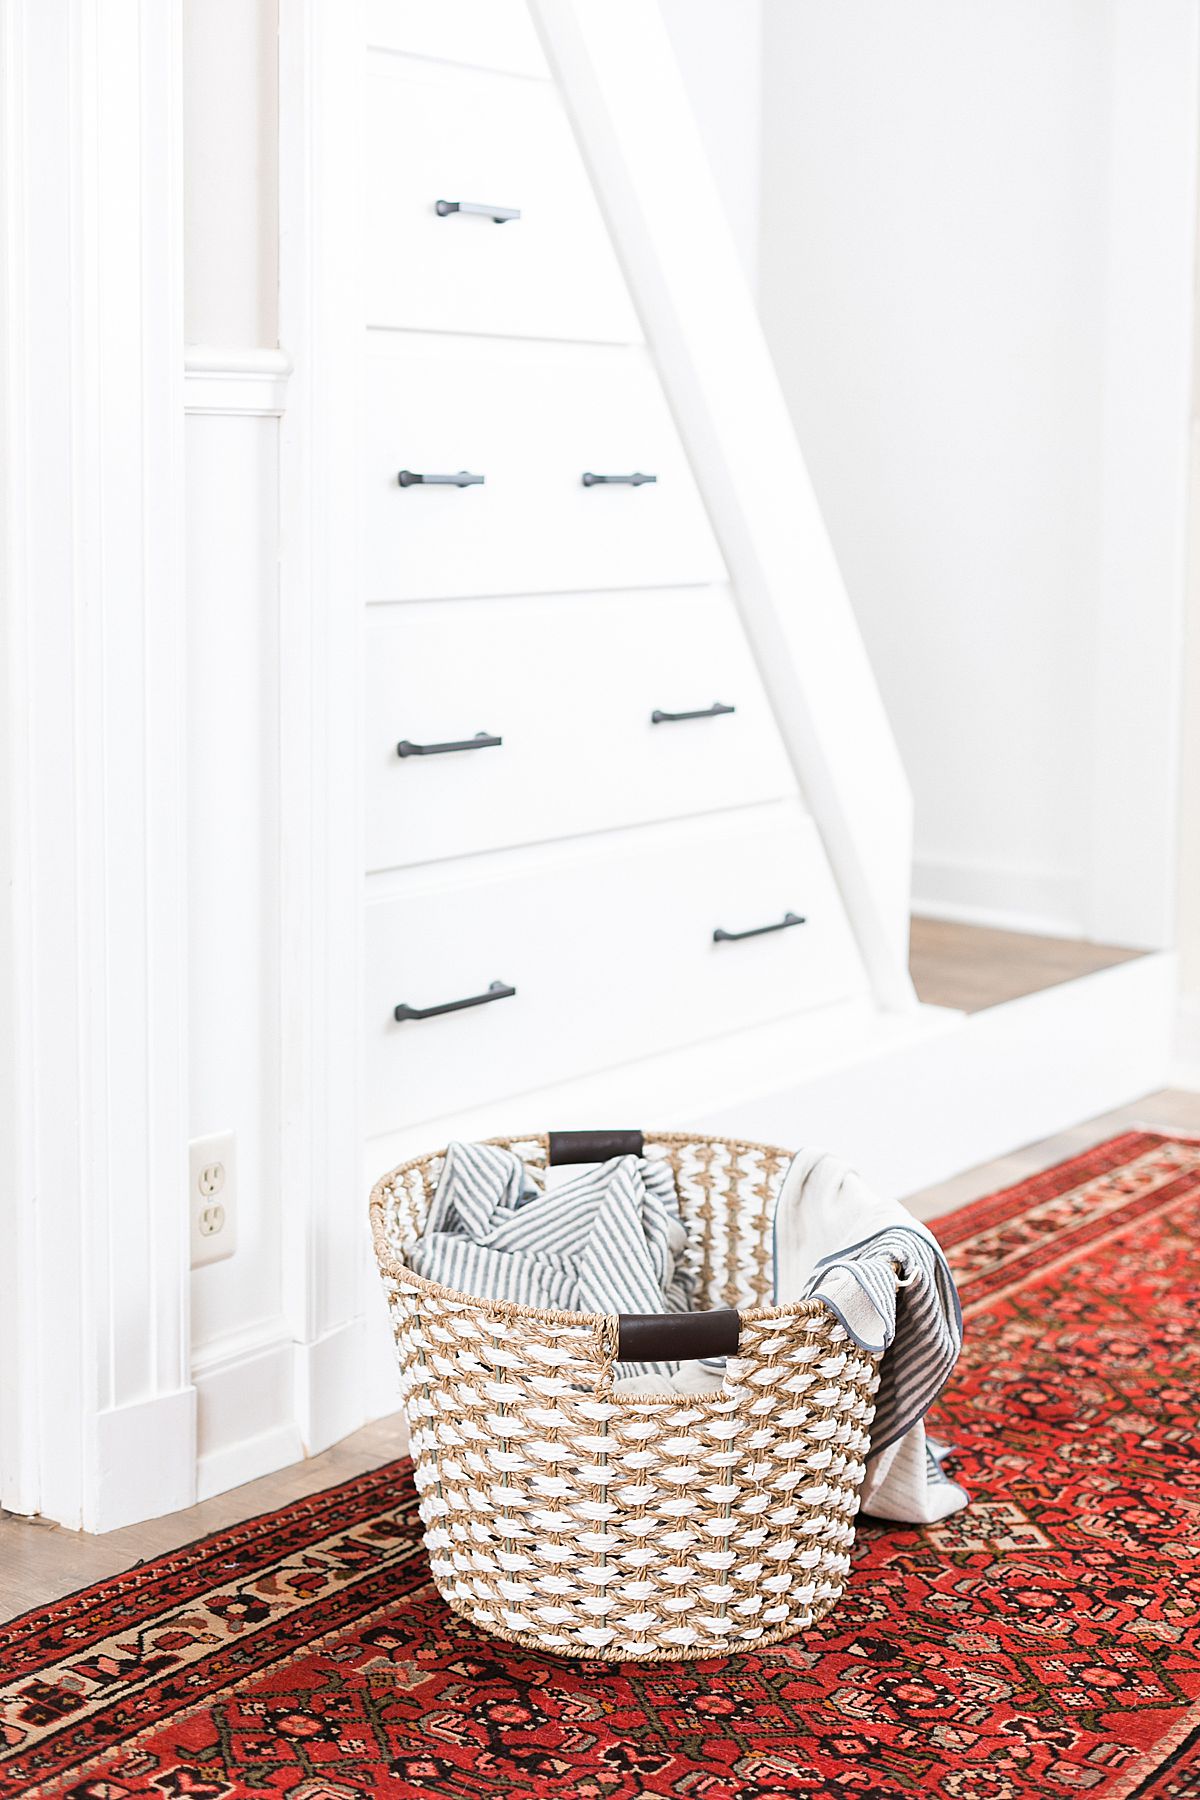 laundry basket by white set built-in of drawers